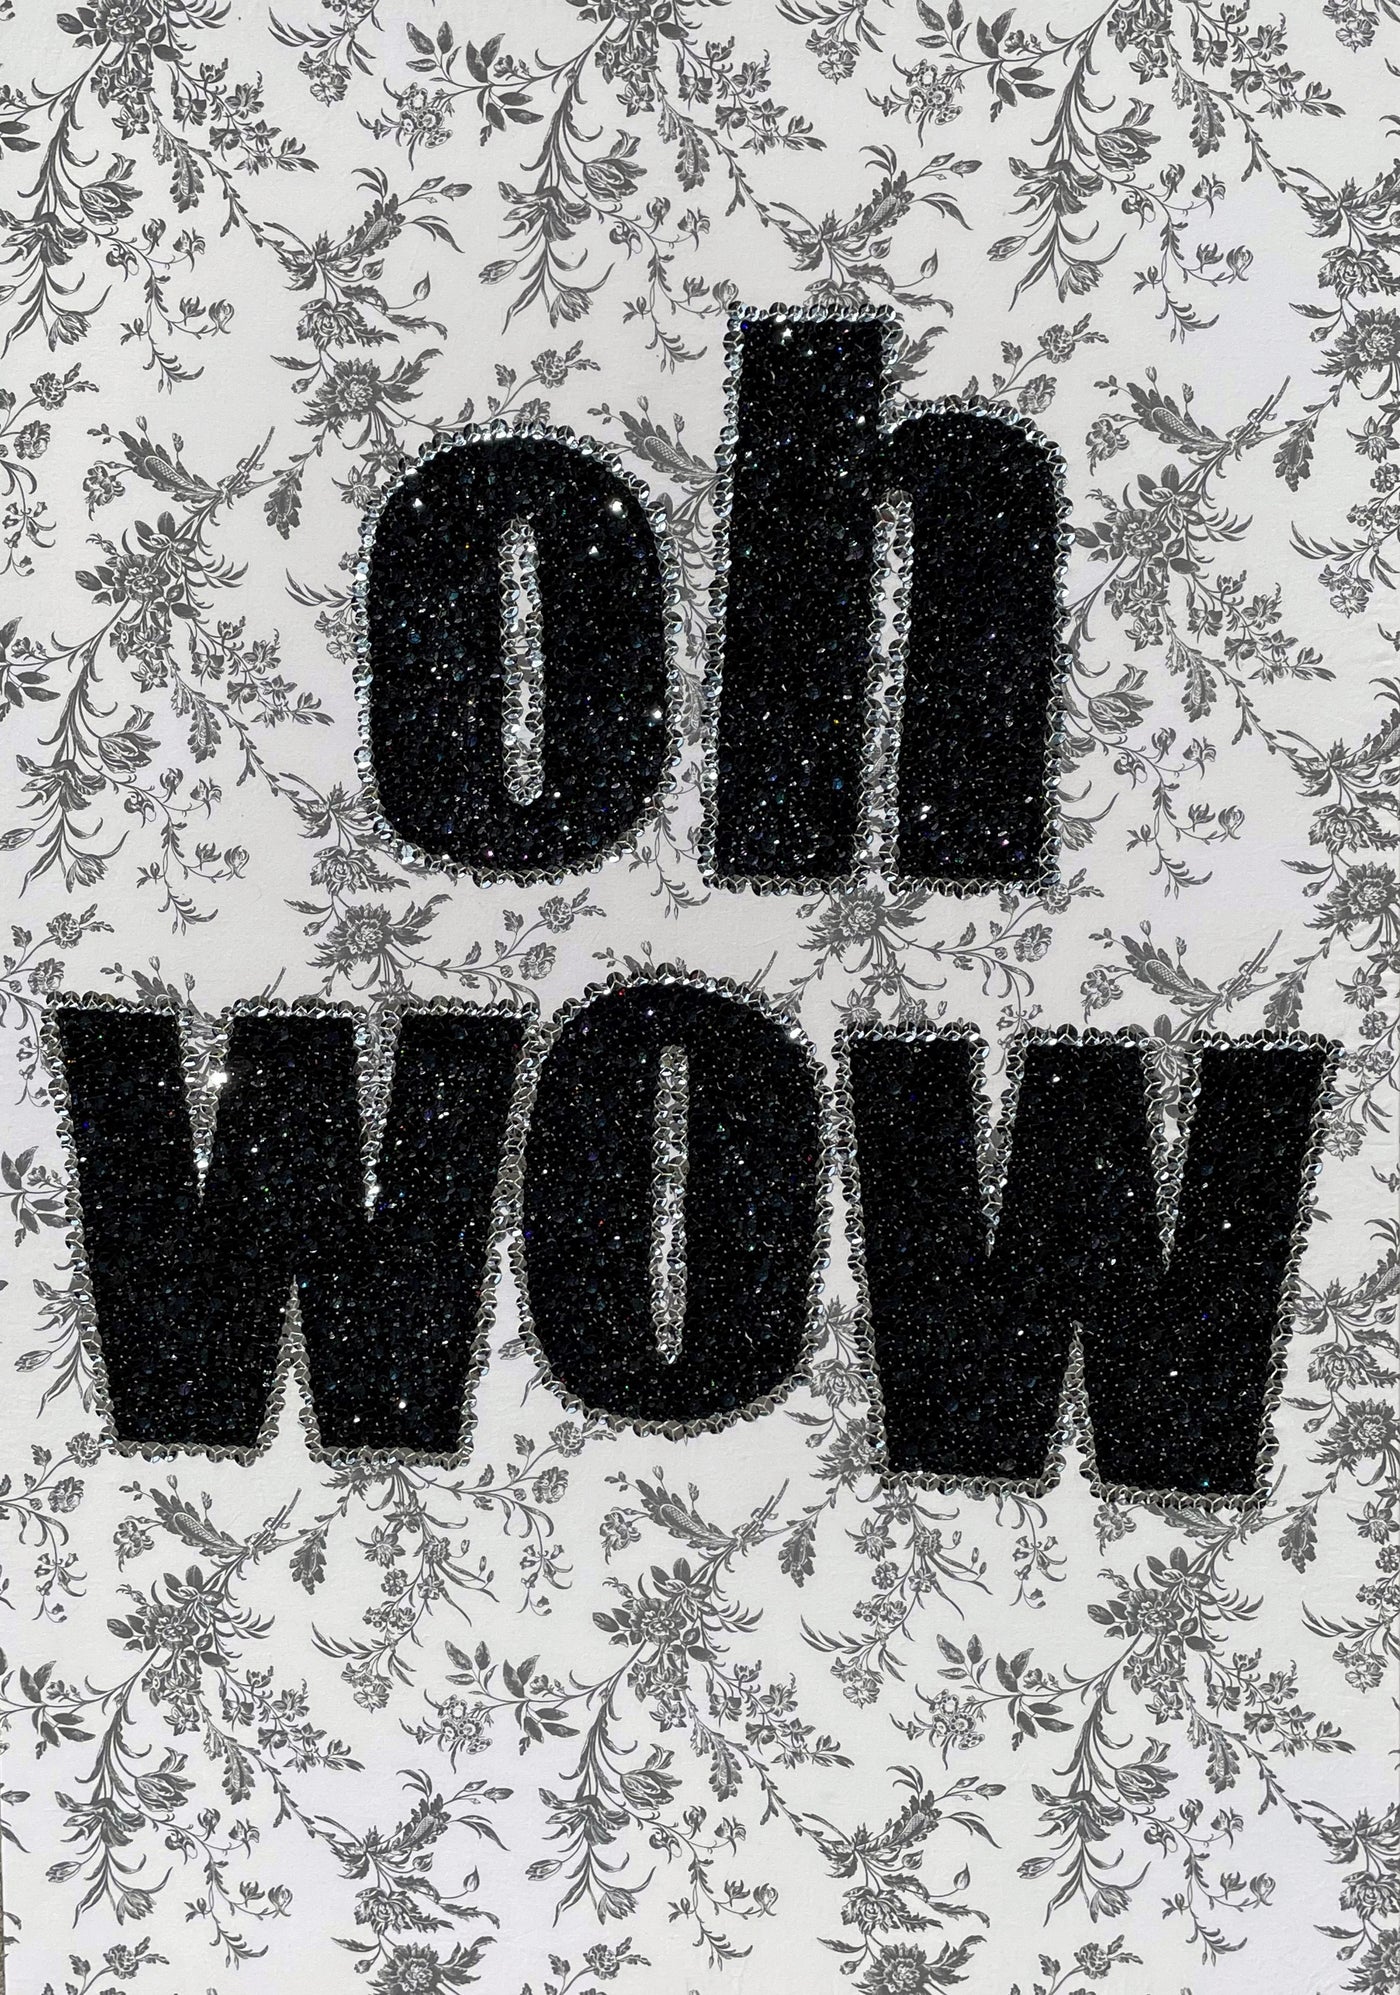 Andrew McPhail - oh wow